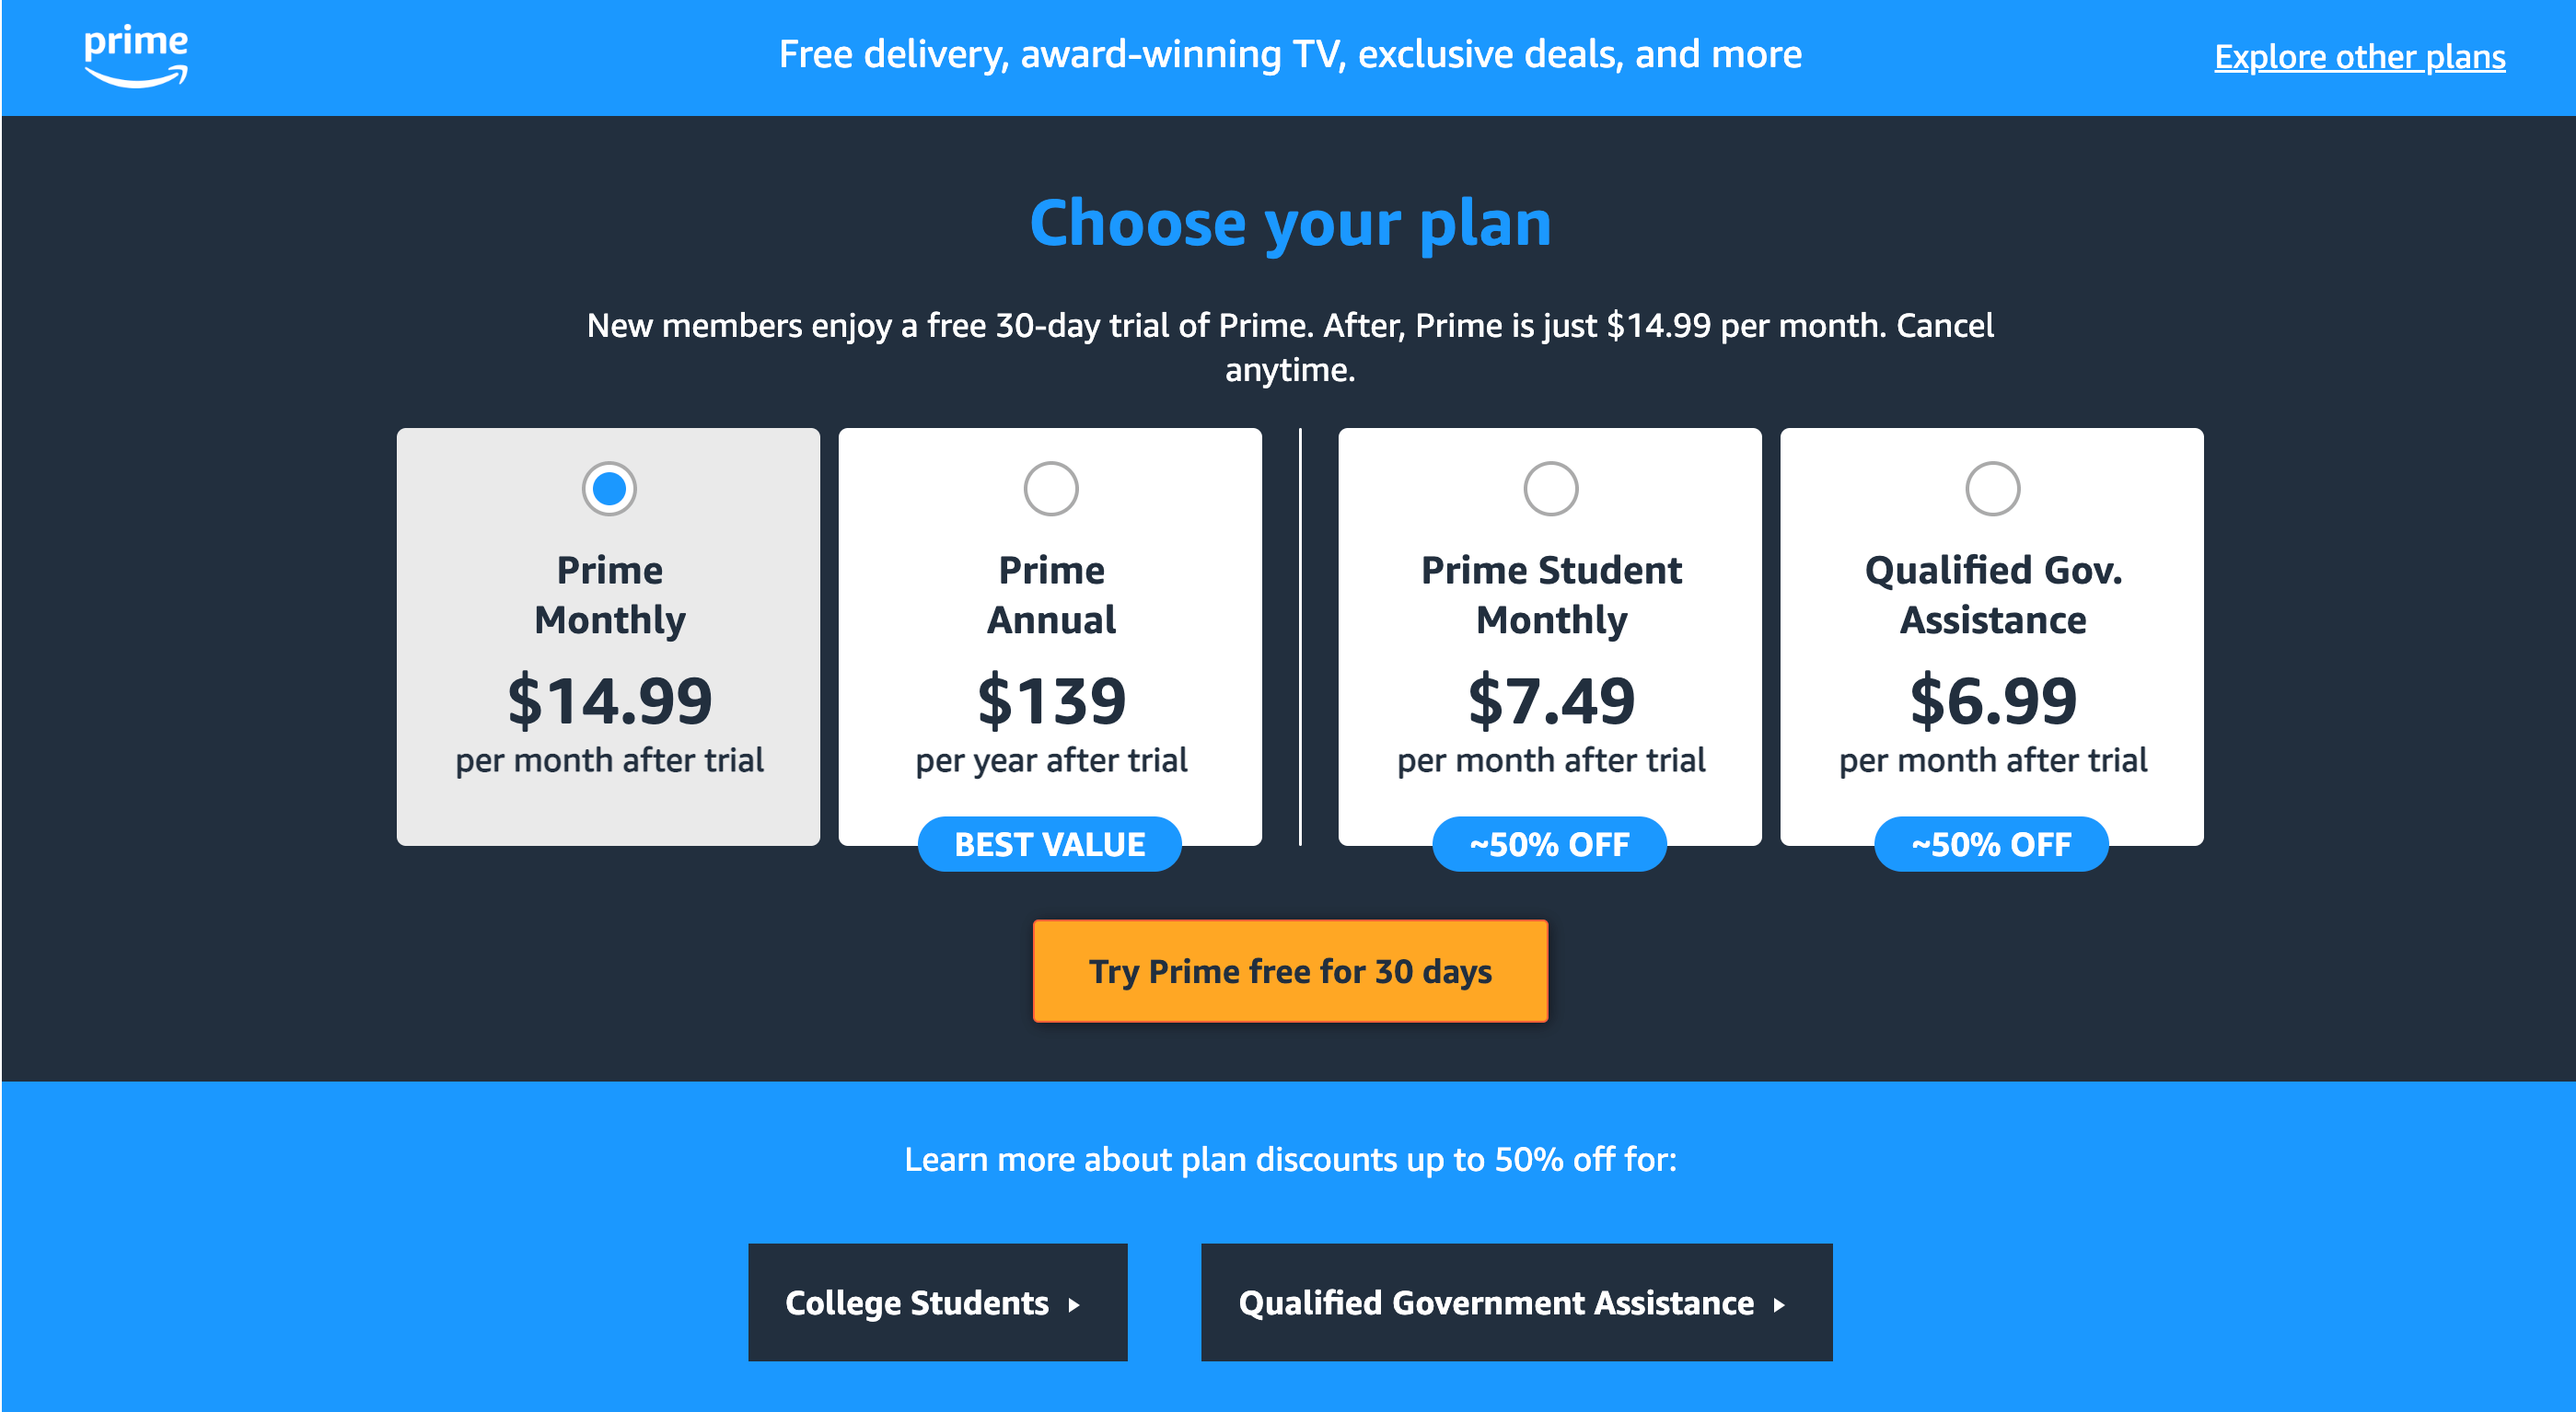 A screenshot of the pricing section on Amazon Prime’s website: Choose your plan. New members enjoy a free 30-day trial of Prime. After that, Prime is just $14.99 per month. Cancel anything. The options are: Prime Monthly ($14.99 per month after trial), Prime Annual ($139 per year after trial. Best Value icon), Prime Student Monthly ($7.49 per month after trial. ~50% off sticker icon), and Qualified Gov. Assistance ($6.99 per month after trial. ~50% off icon). 